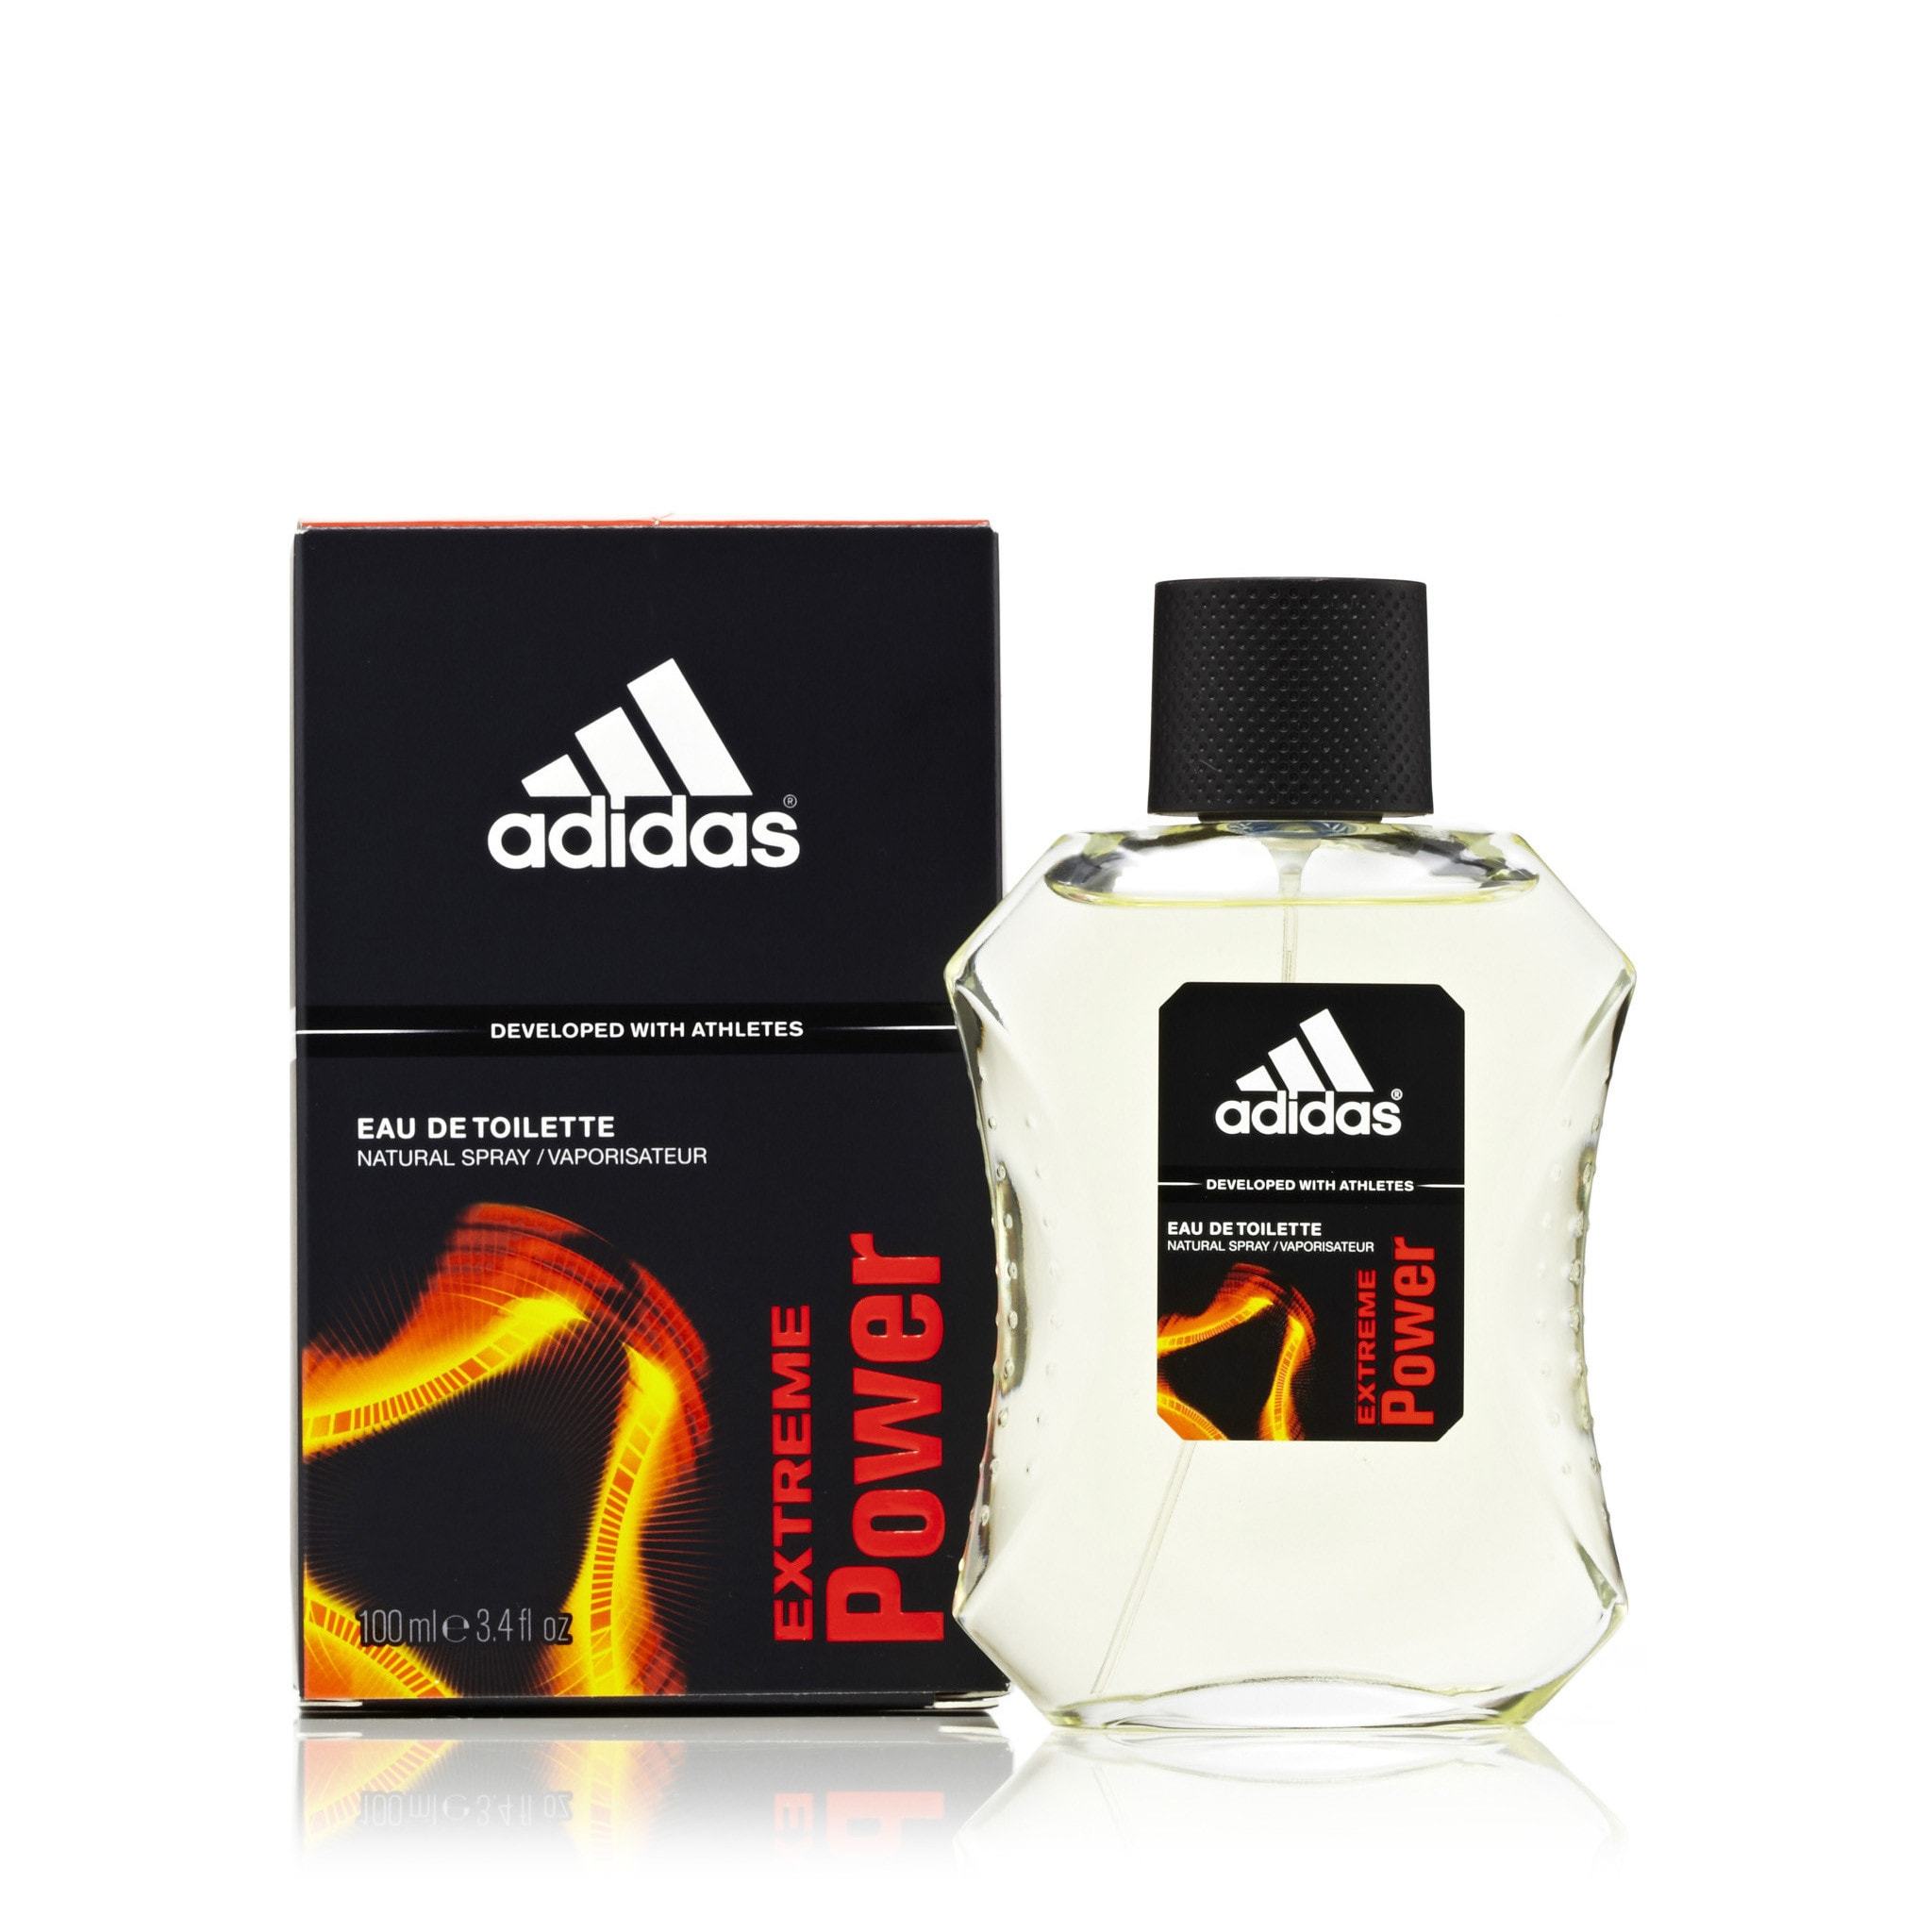 Extreme Power EDT Men by Adidas Fragrance Outlet